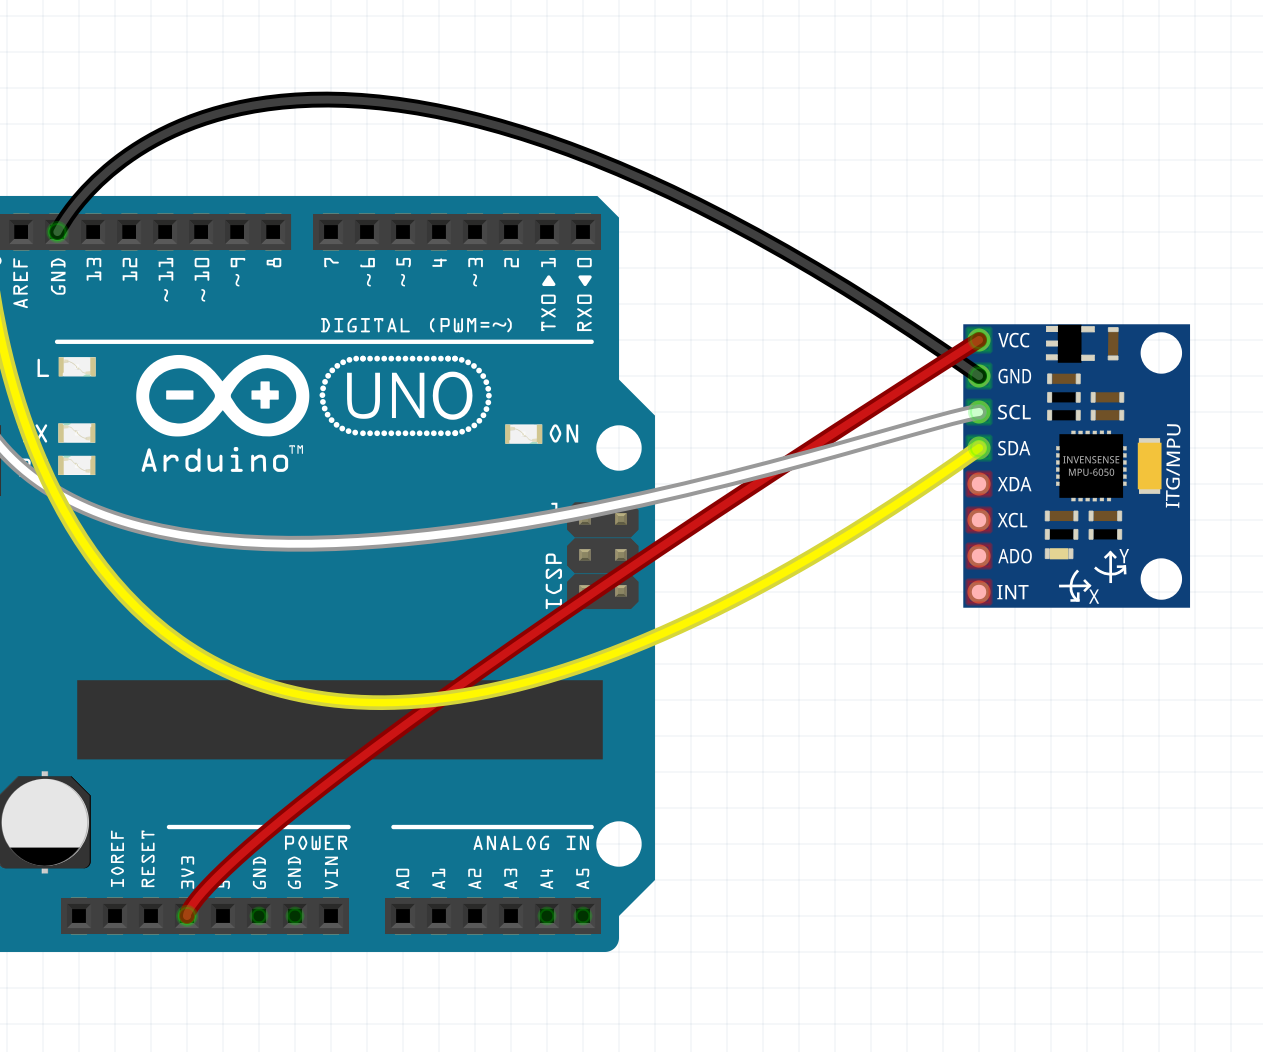 How to Connect MPU6050 to Arduino UNO